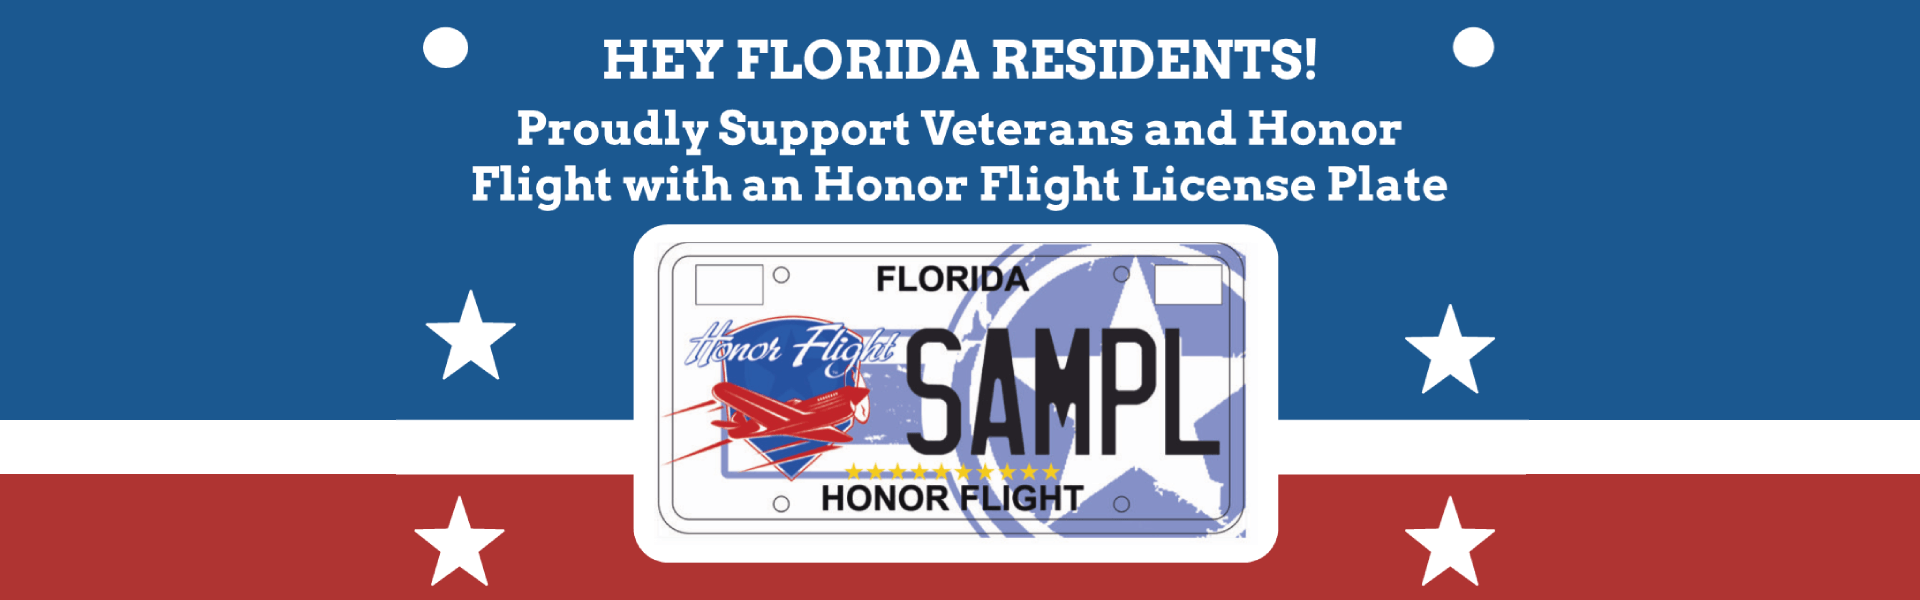 Honor Flight License Plate Signup